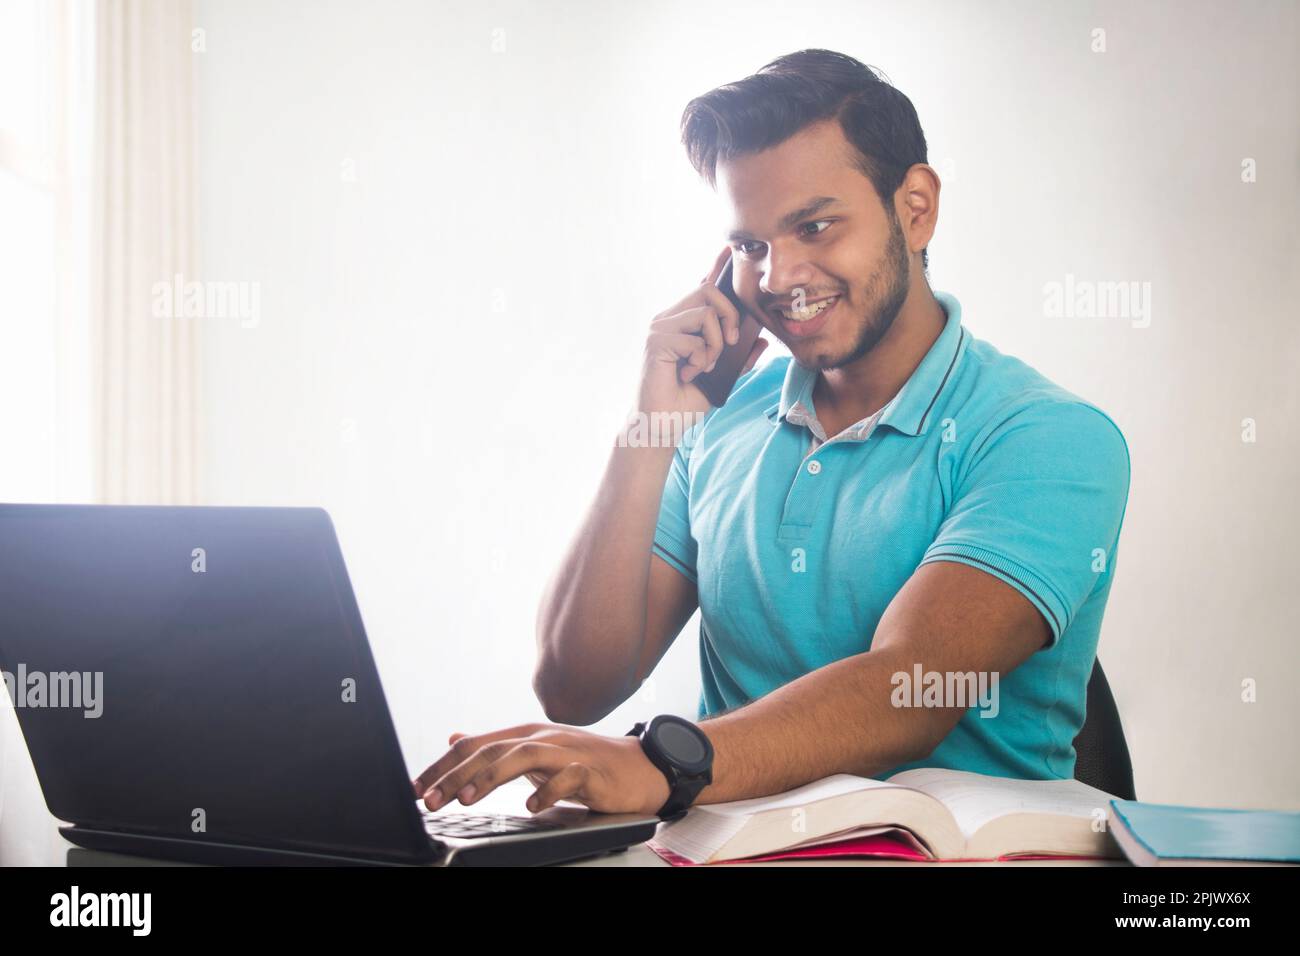 A YOUNG TEENAGER TALKING ON THE PHONE WHILE ATTENDING A CLASS ONLINE Stock Photo